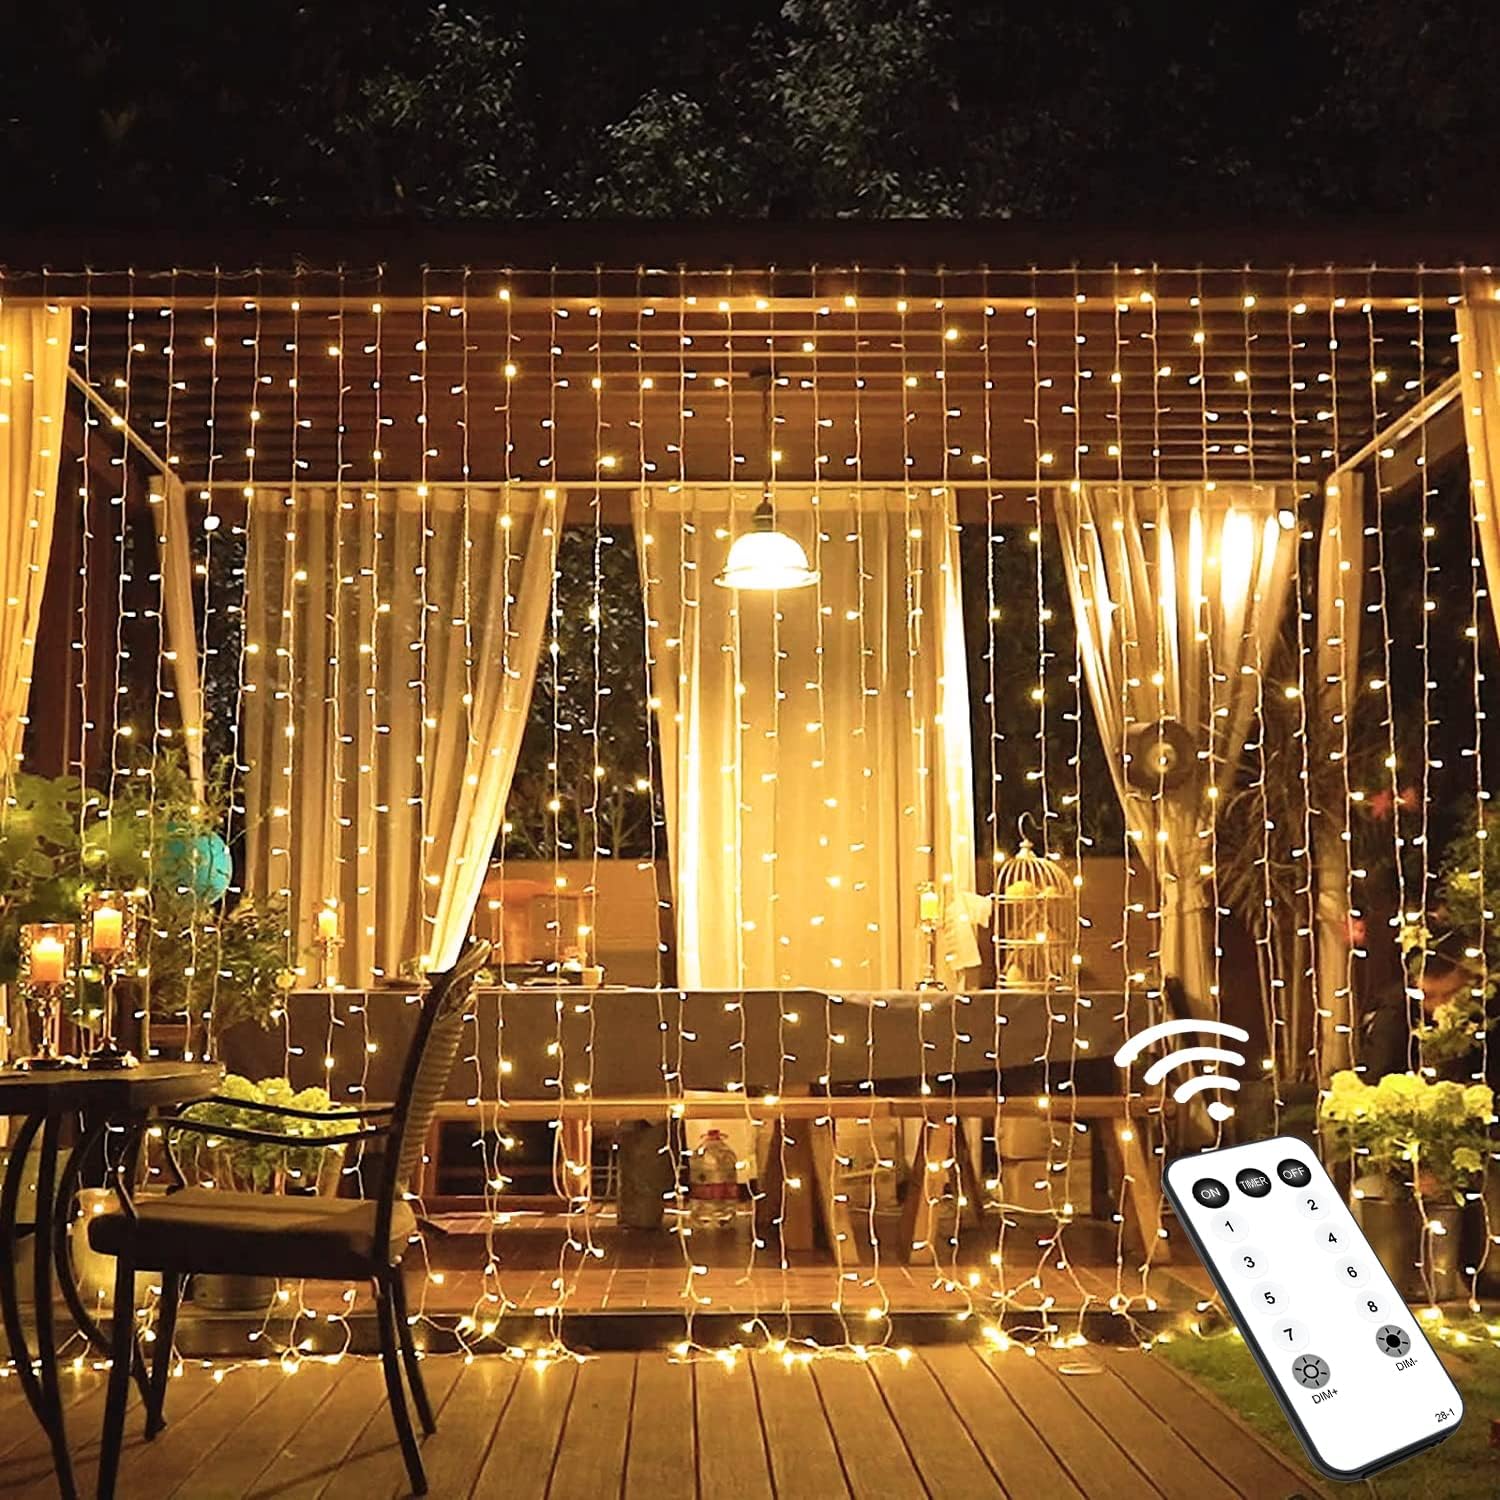 JMEXSUSS 600 LED Christmas Curtain Lights Outdoor, 9.5x19.6ft Christmas String Lights Plug in with Remote, 8 Modes Wall Hanging Lights for Bedroom Party Backdrop Wedding Christmas Decor, Warm White